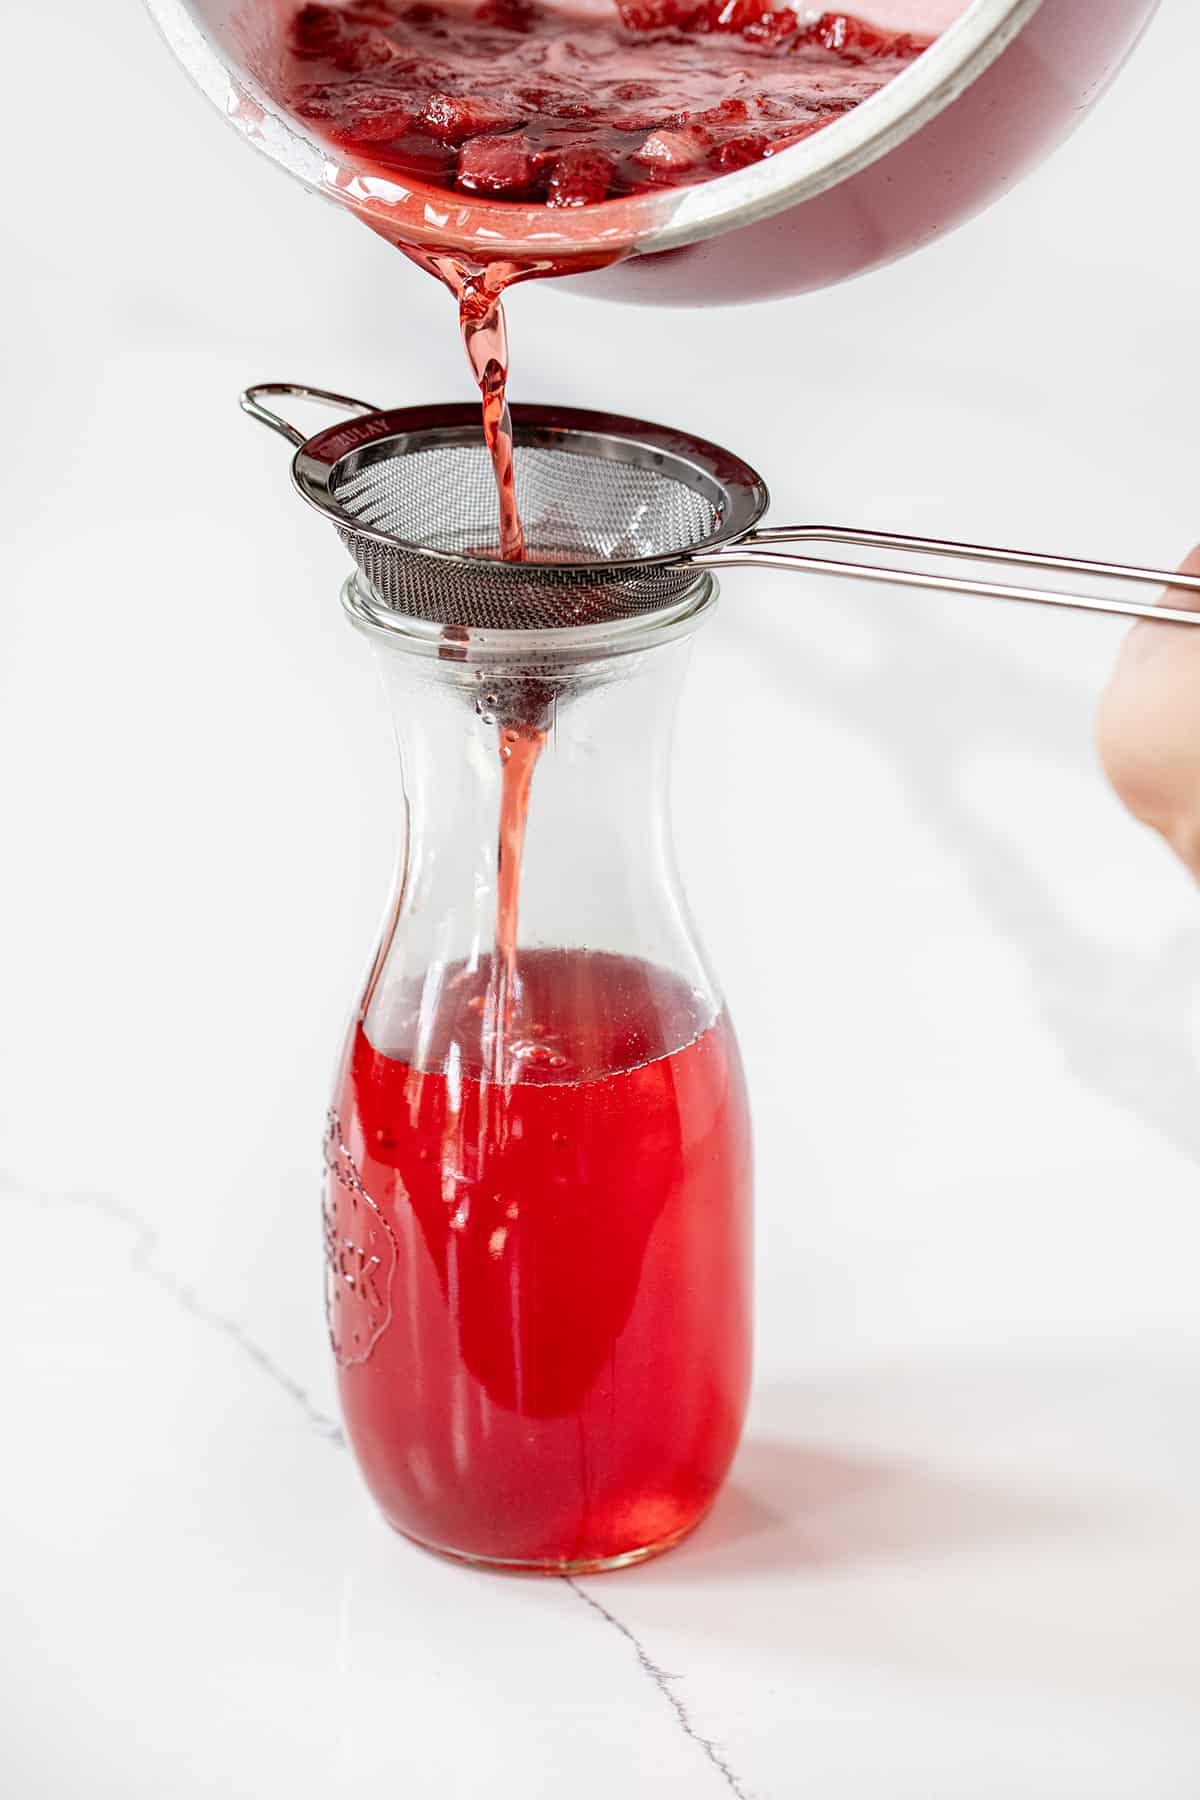 Straining Strawberry Mixture into Bottle to Make Strawberry Simple Syrup.